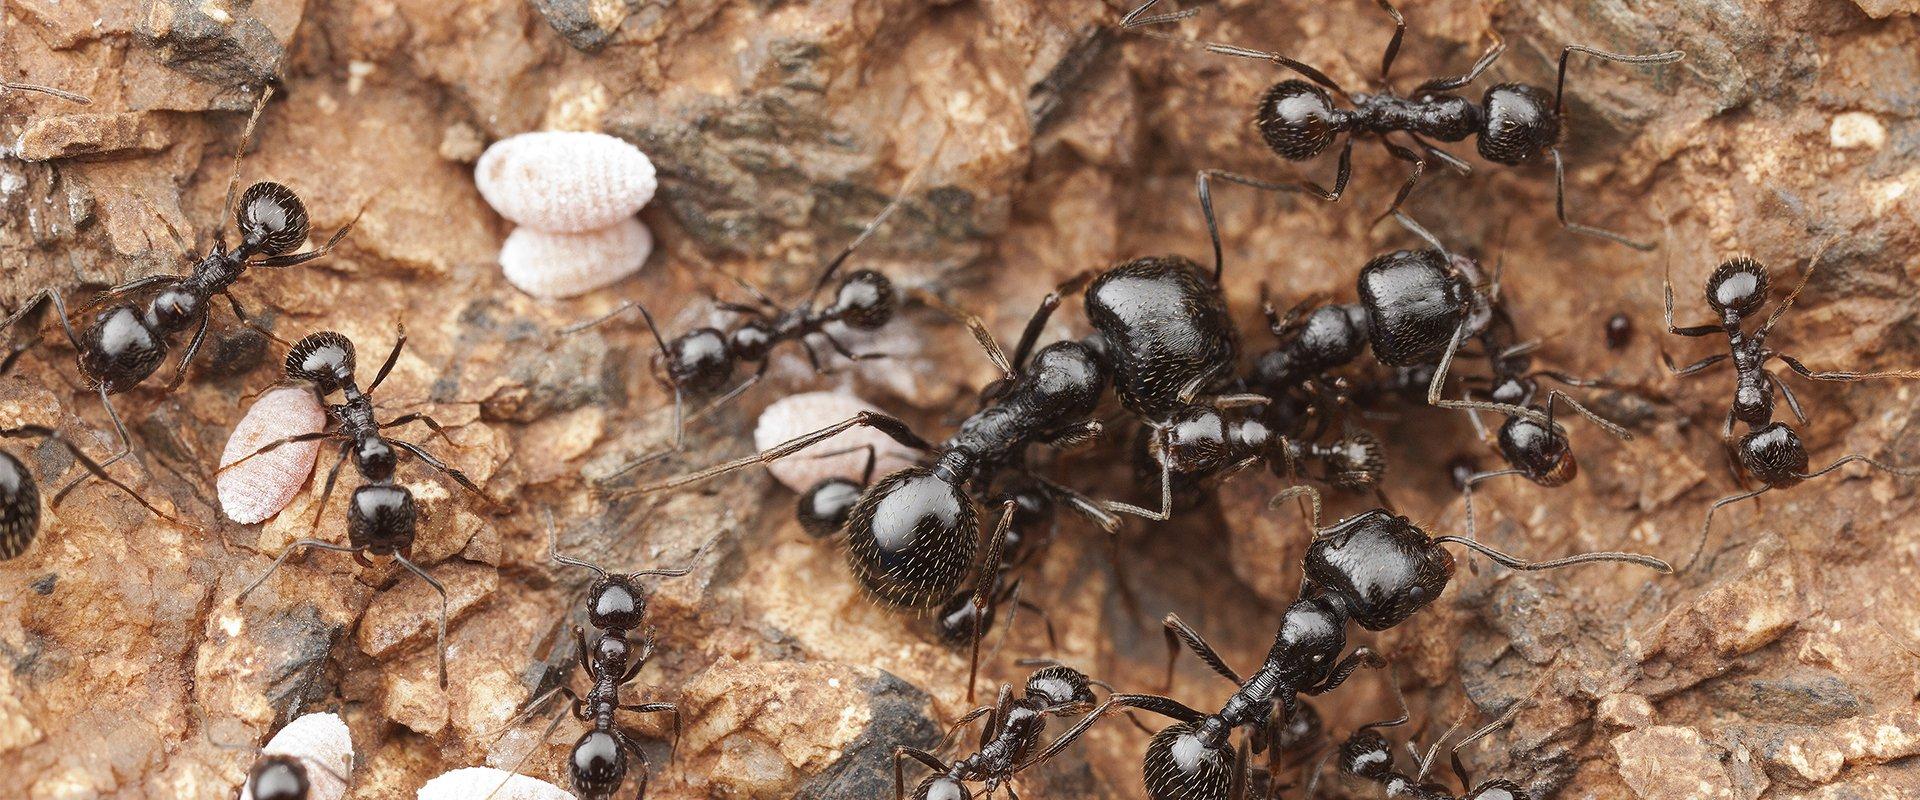 a group of harvester ants